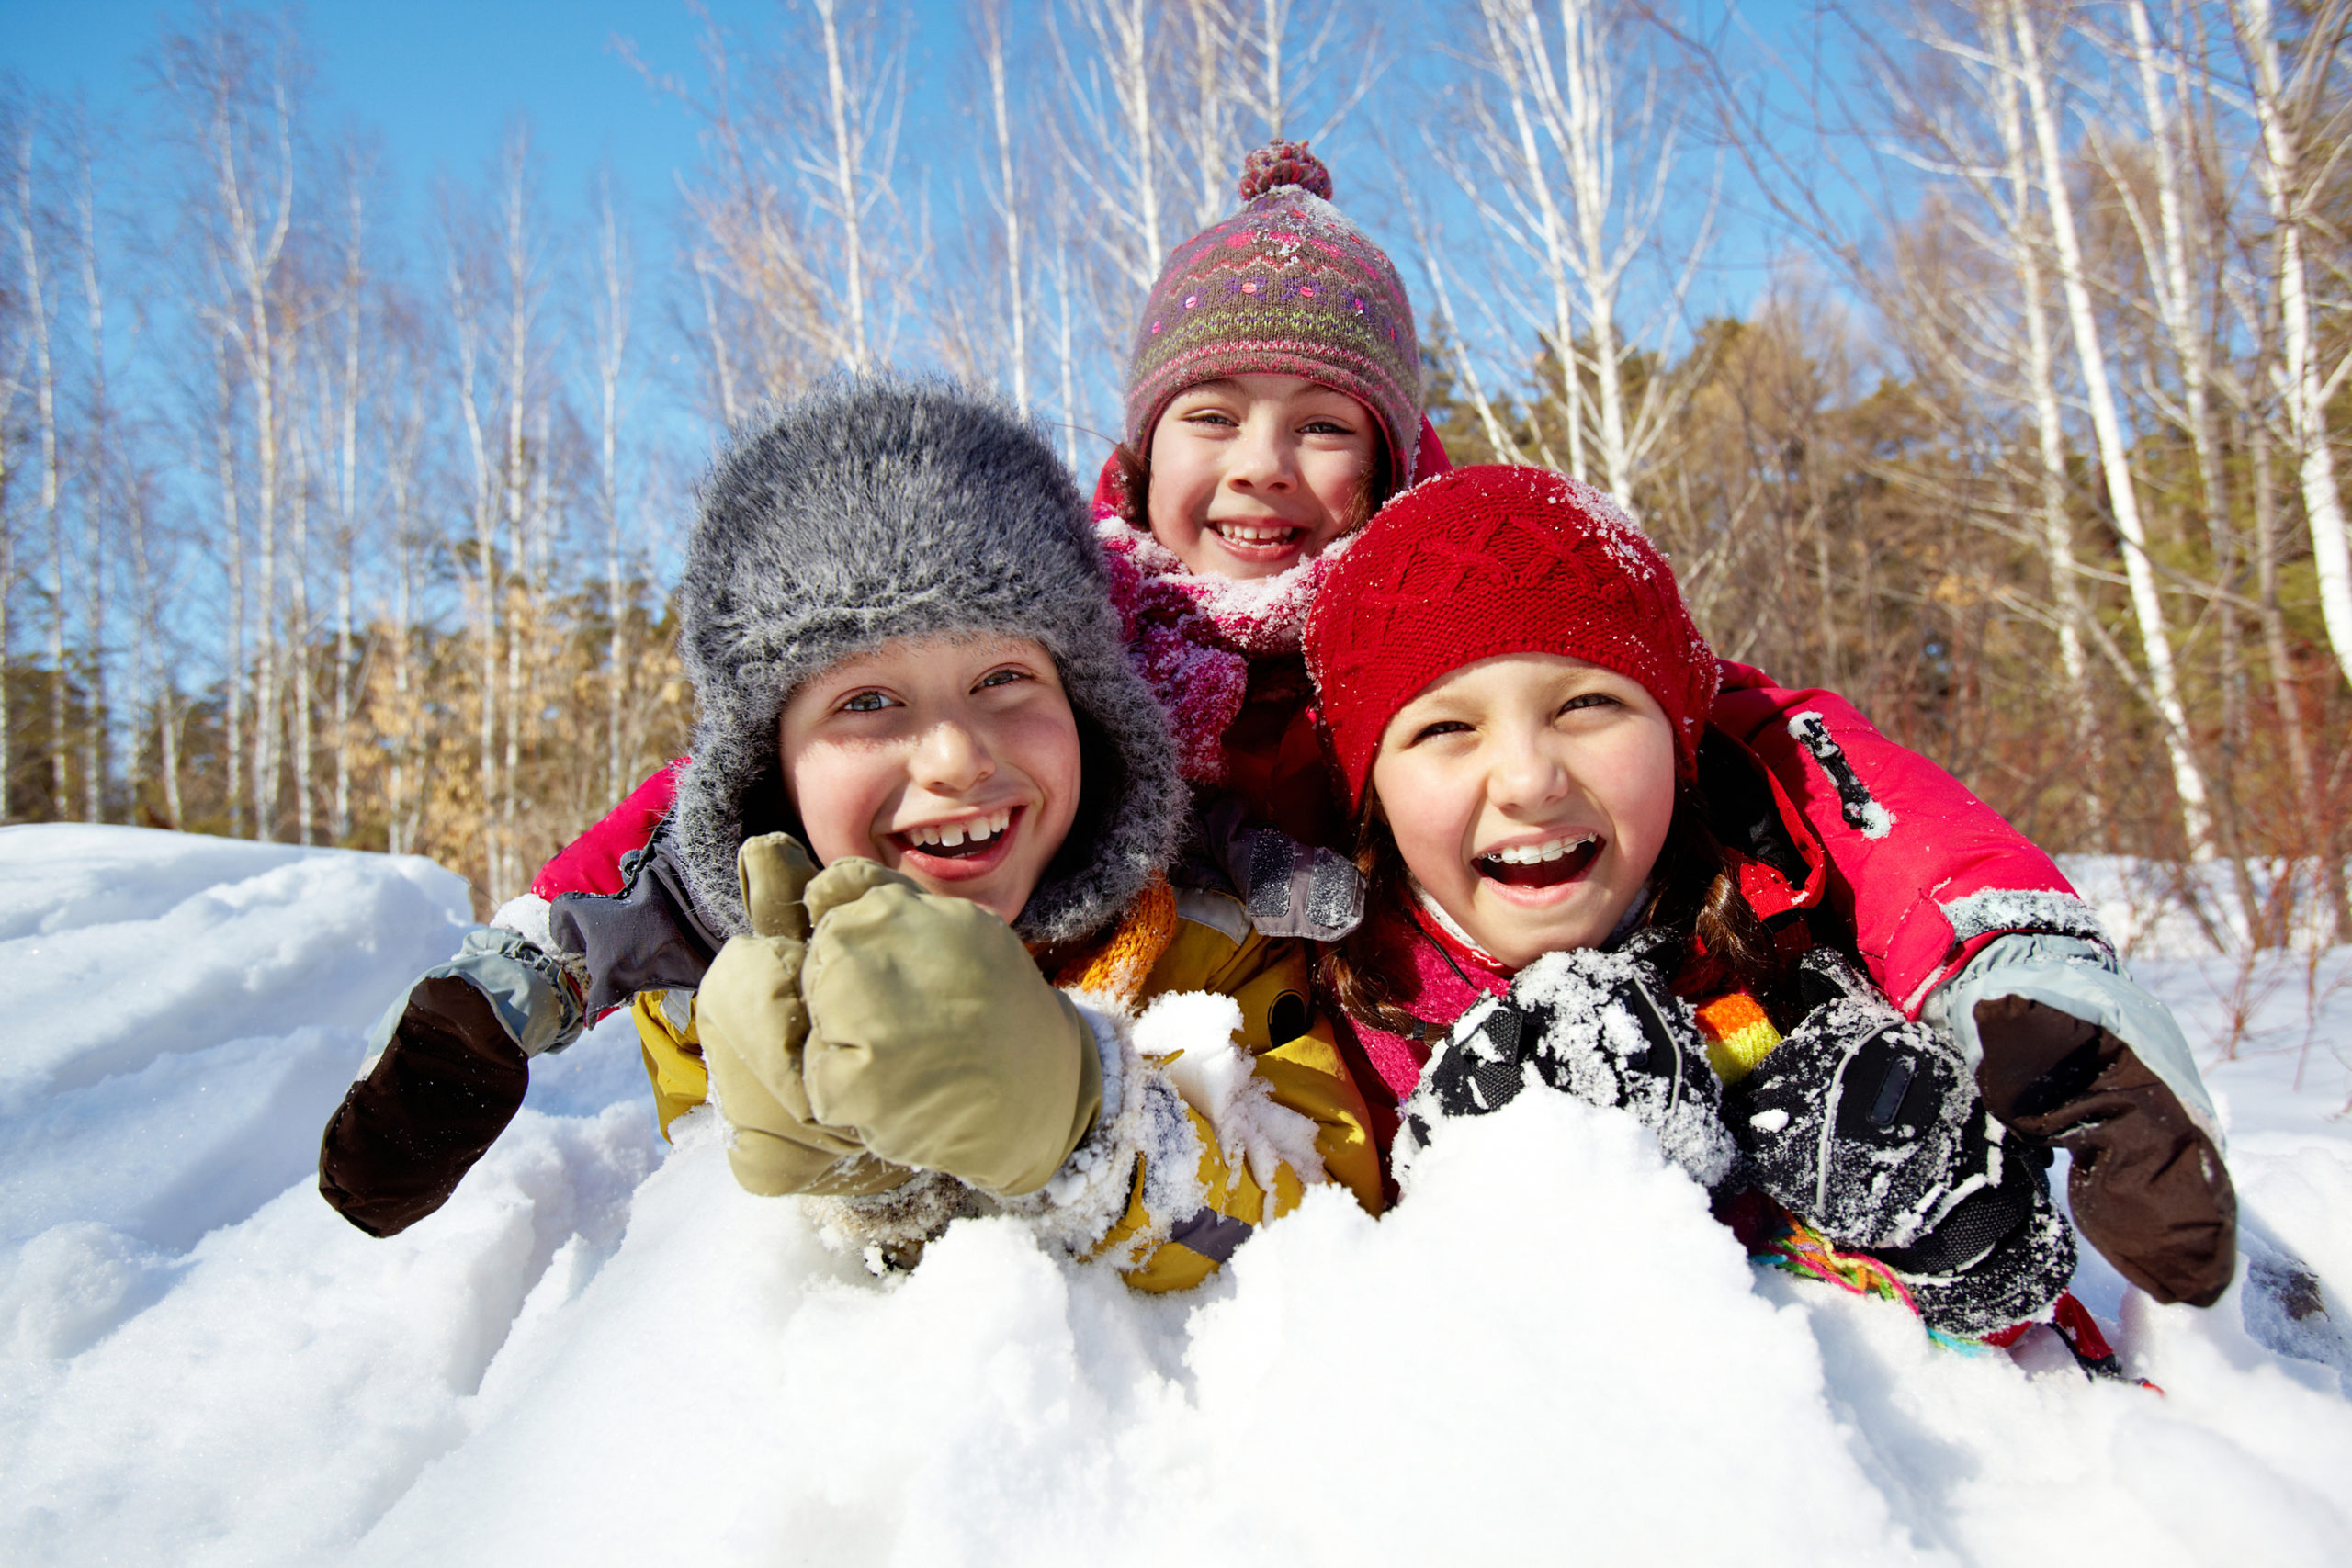 3 kids in snow pile laughing